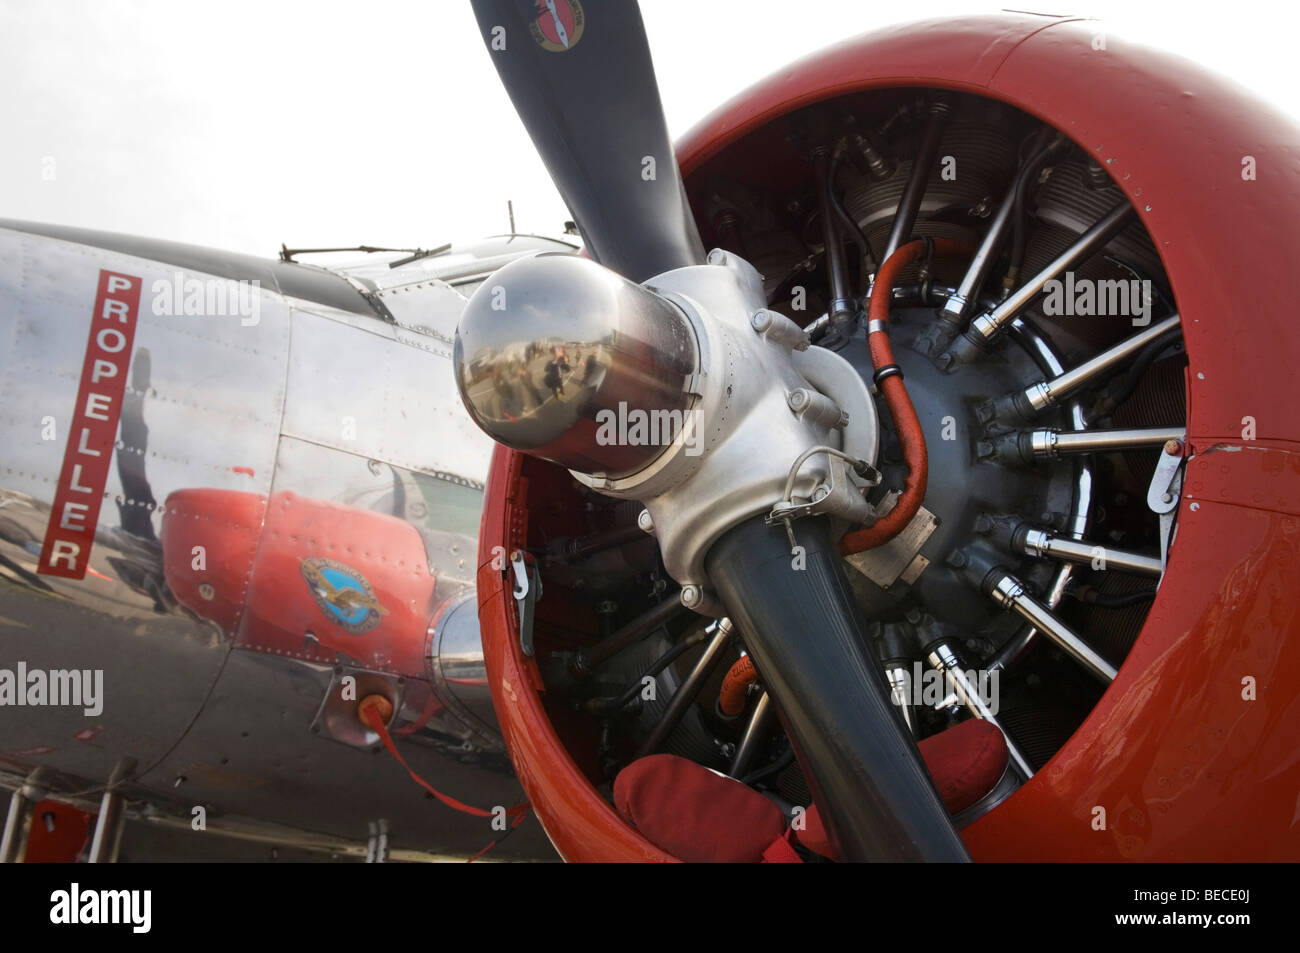 Twin-engined vintage airplane, detail, view of the radial engine with propeller shaft Stock Photo